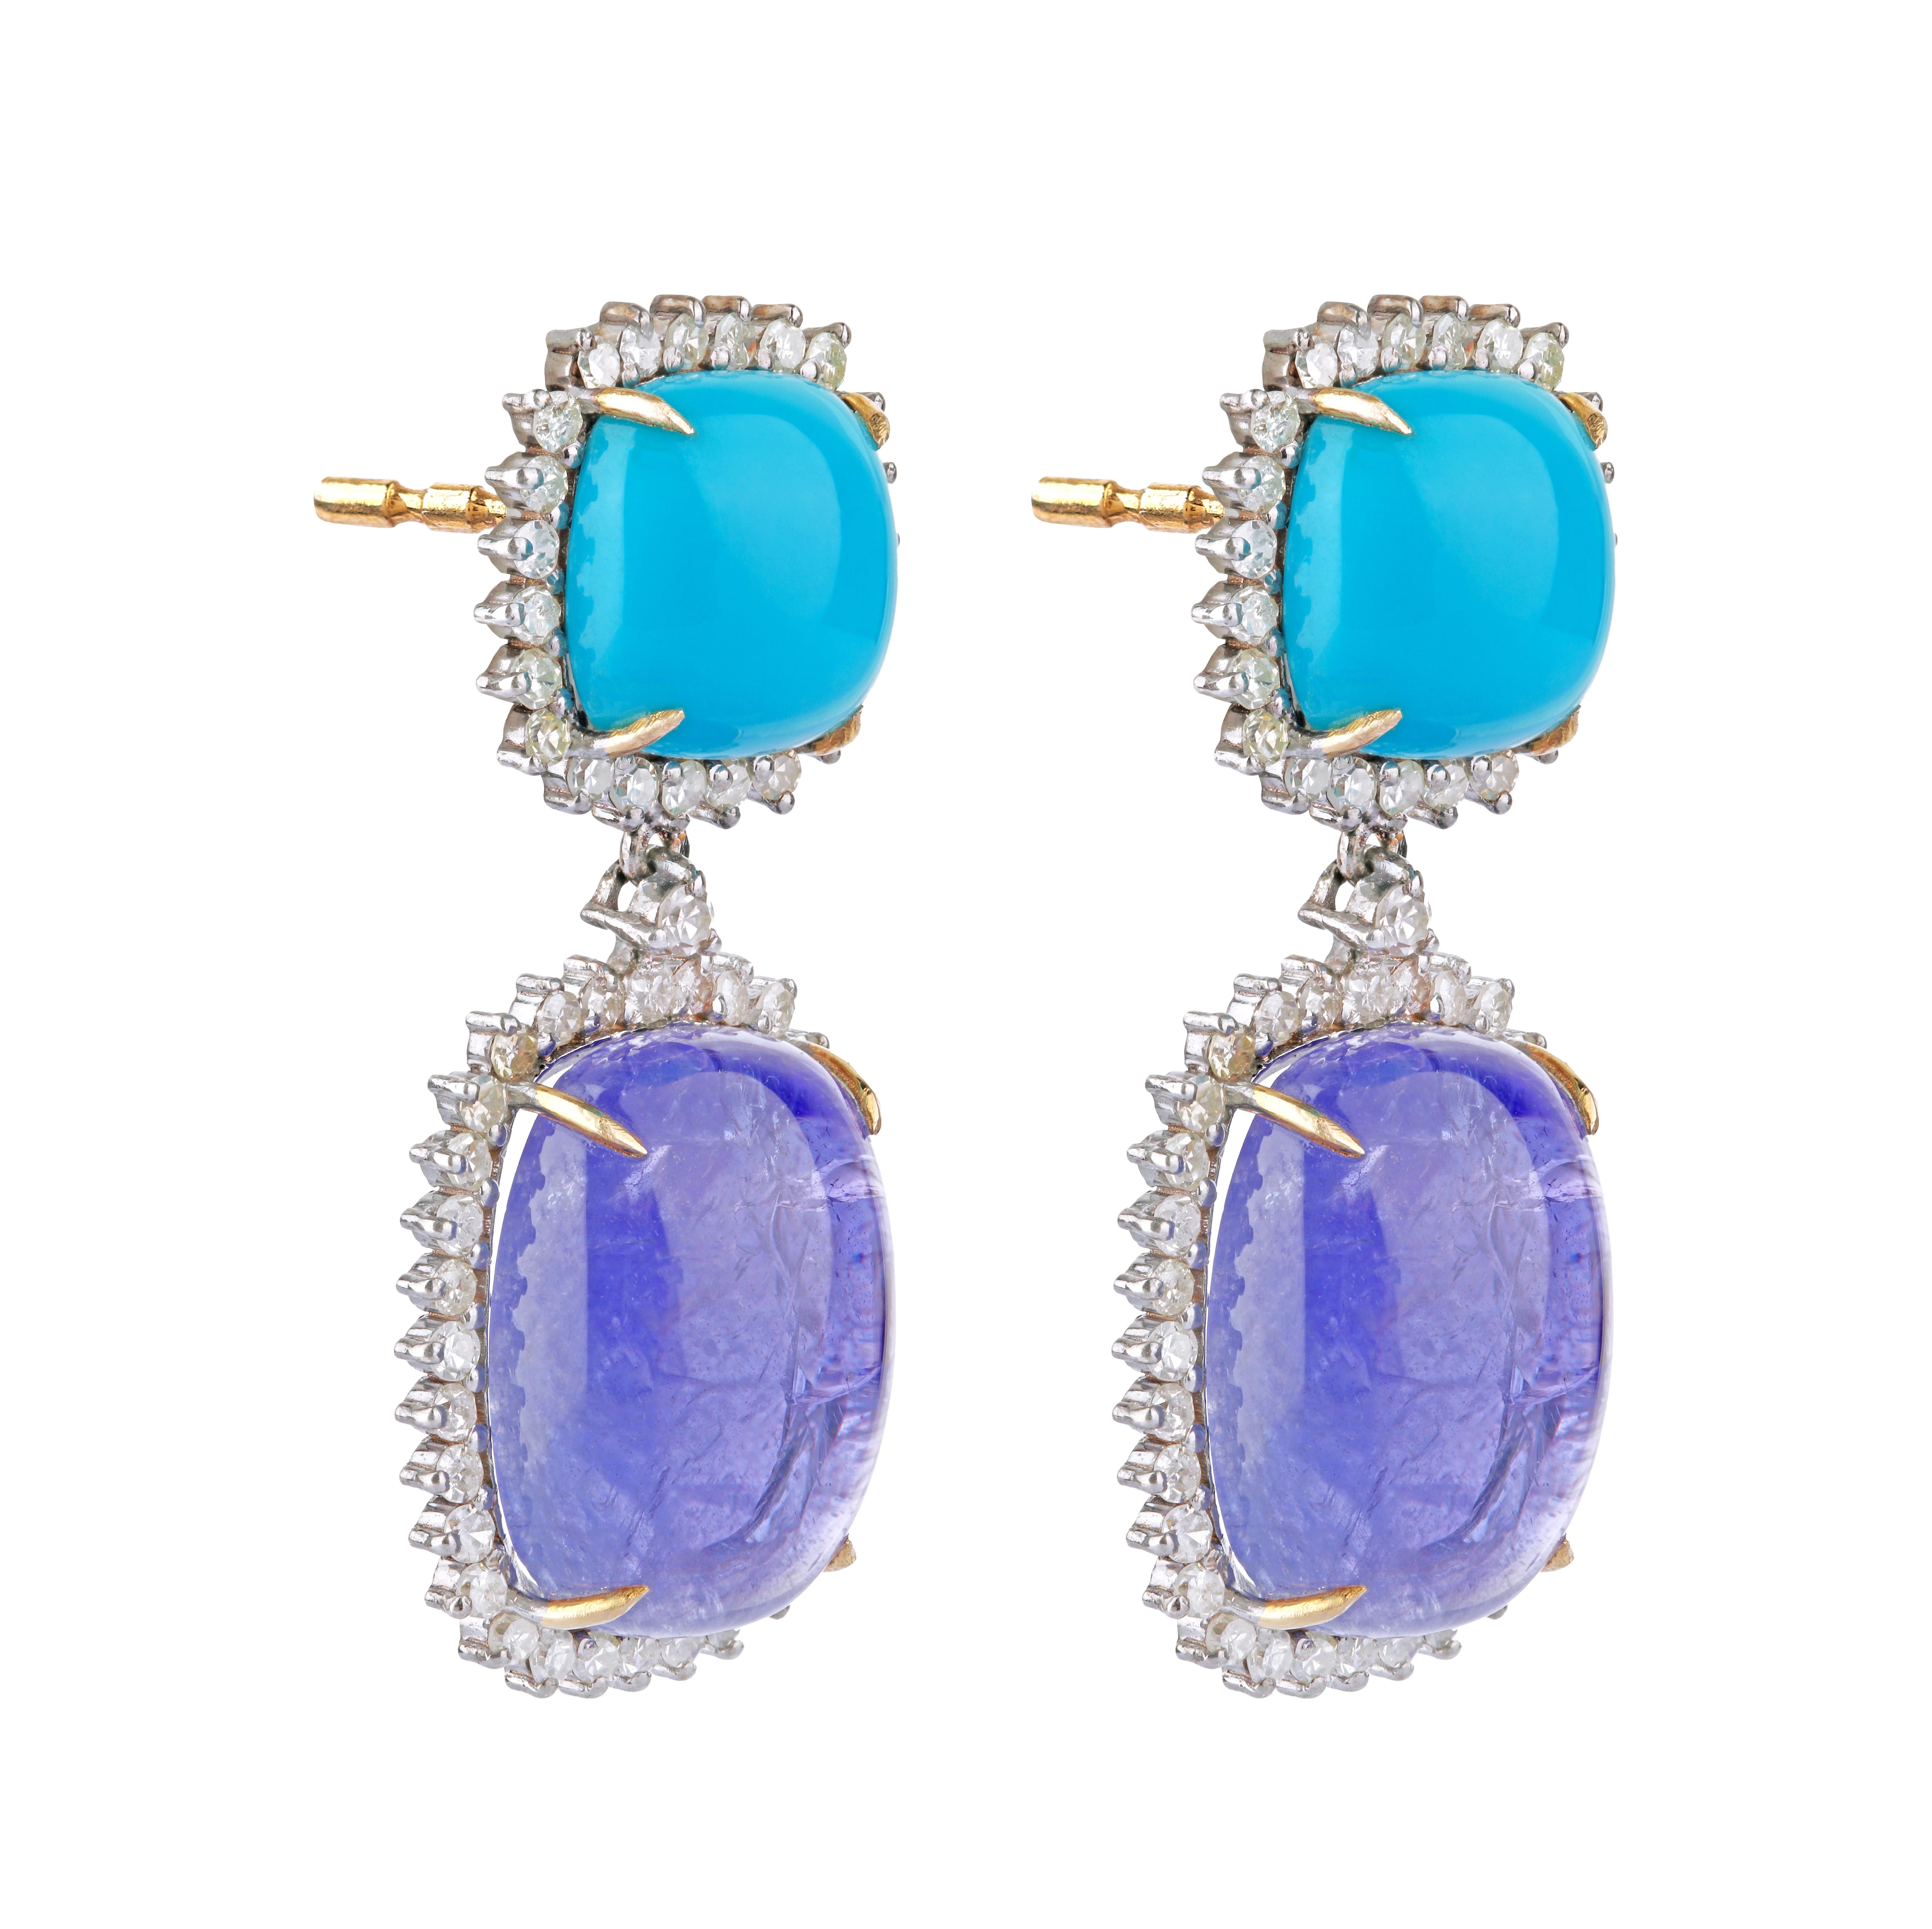 30.07 Carats Diamond, Tanzanite, and Turquoise Dangle Earrings in Modern Style

Perfection speaks for itself. For it, does not have a language but a form. A form that is clearly portrayed in this pair of earrings. This scintillating set of earrings